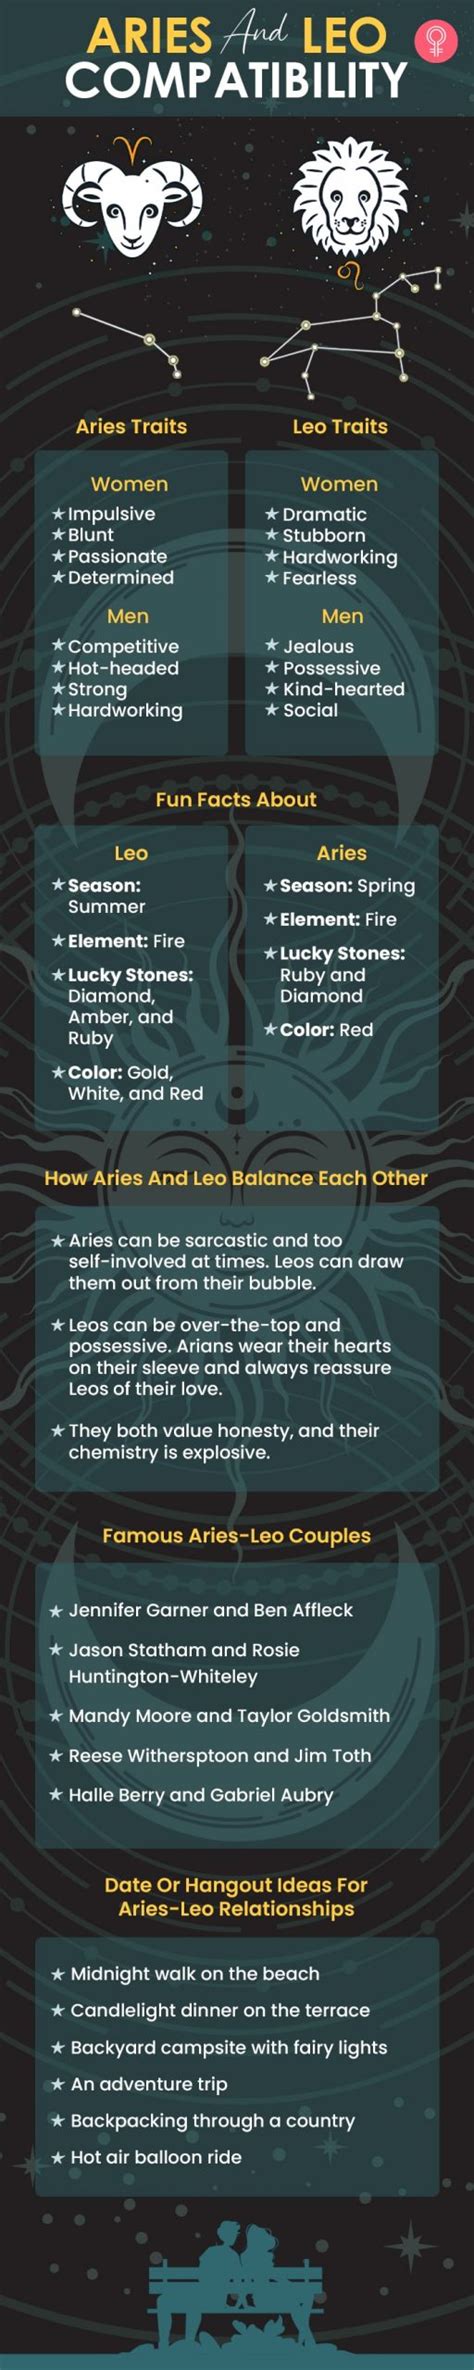 aries and leo compatibility in love sex and friendship